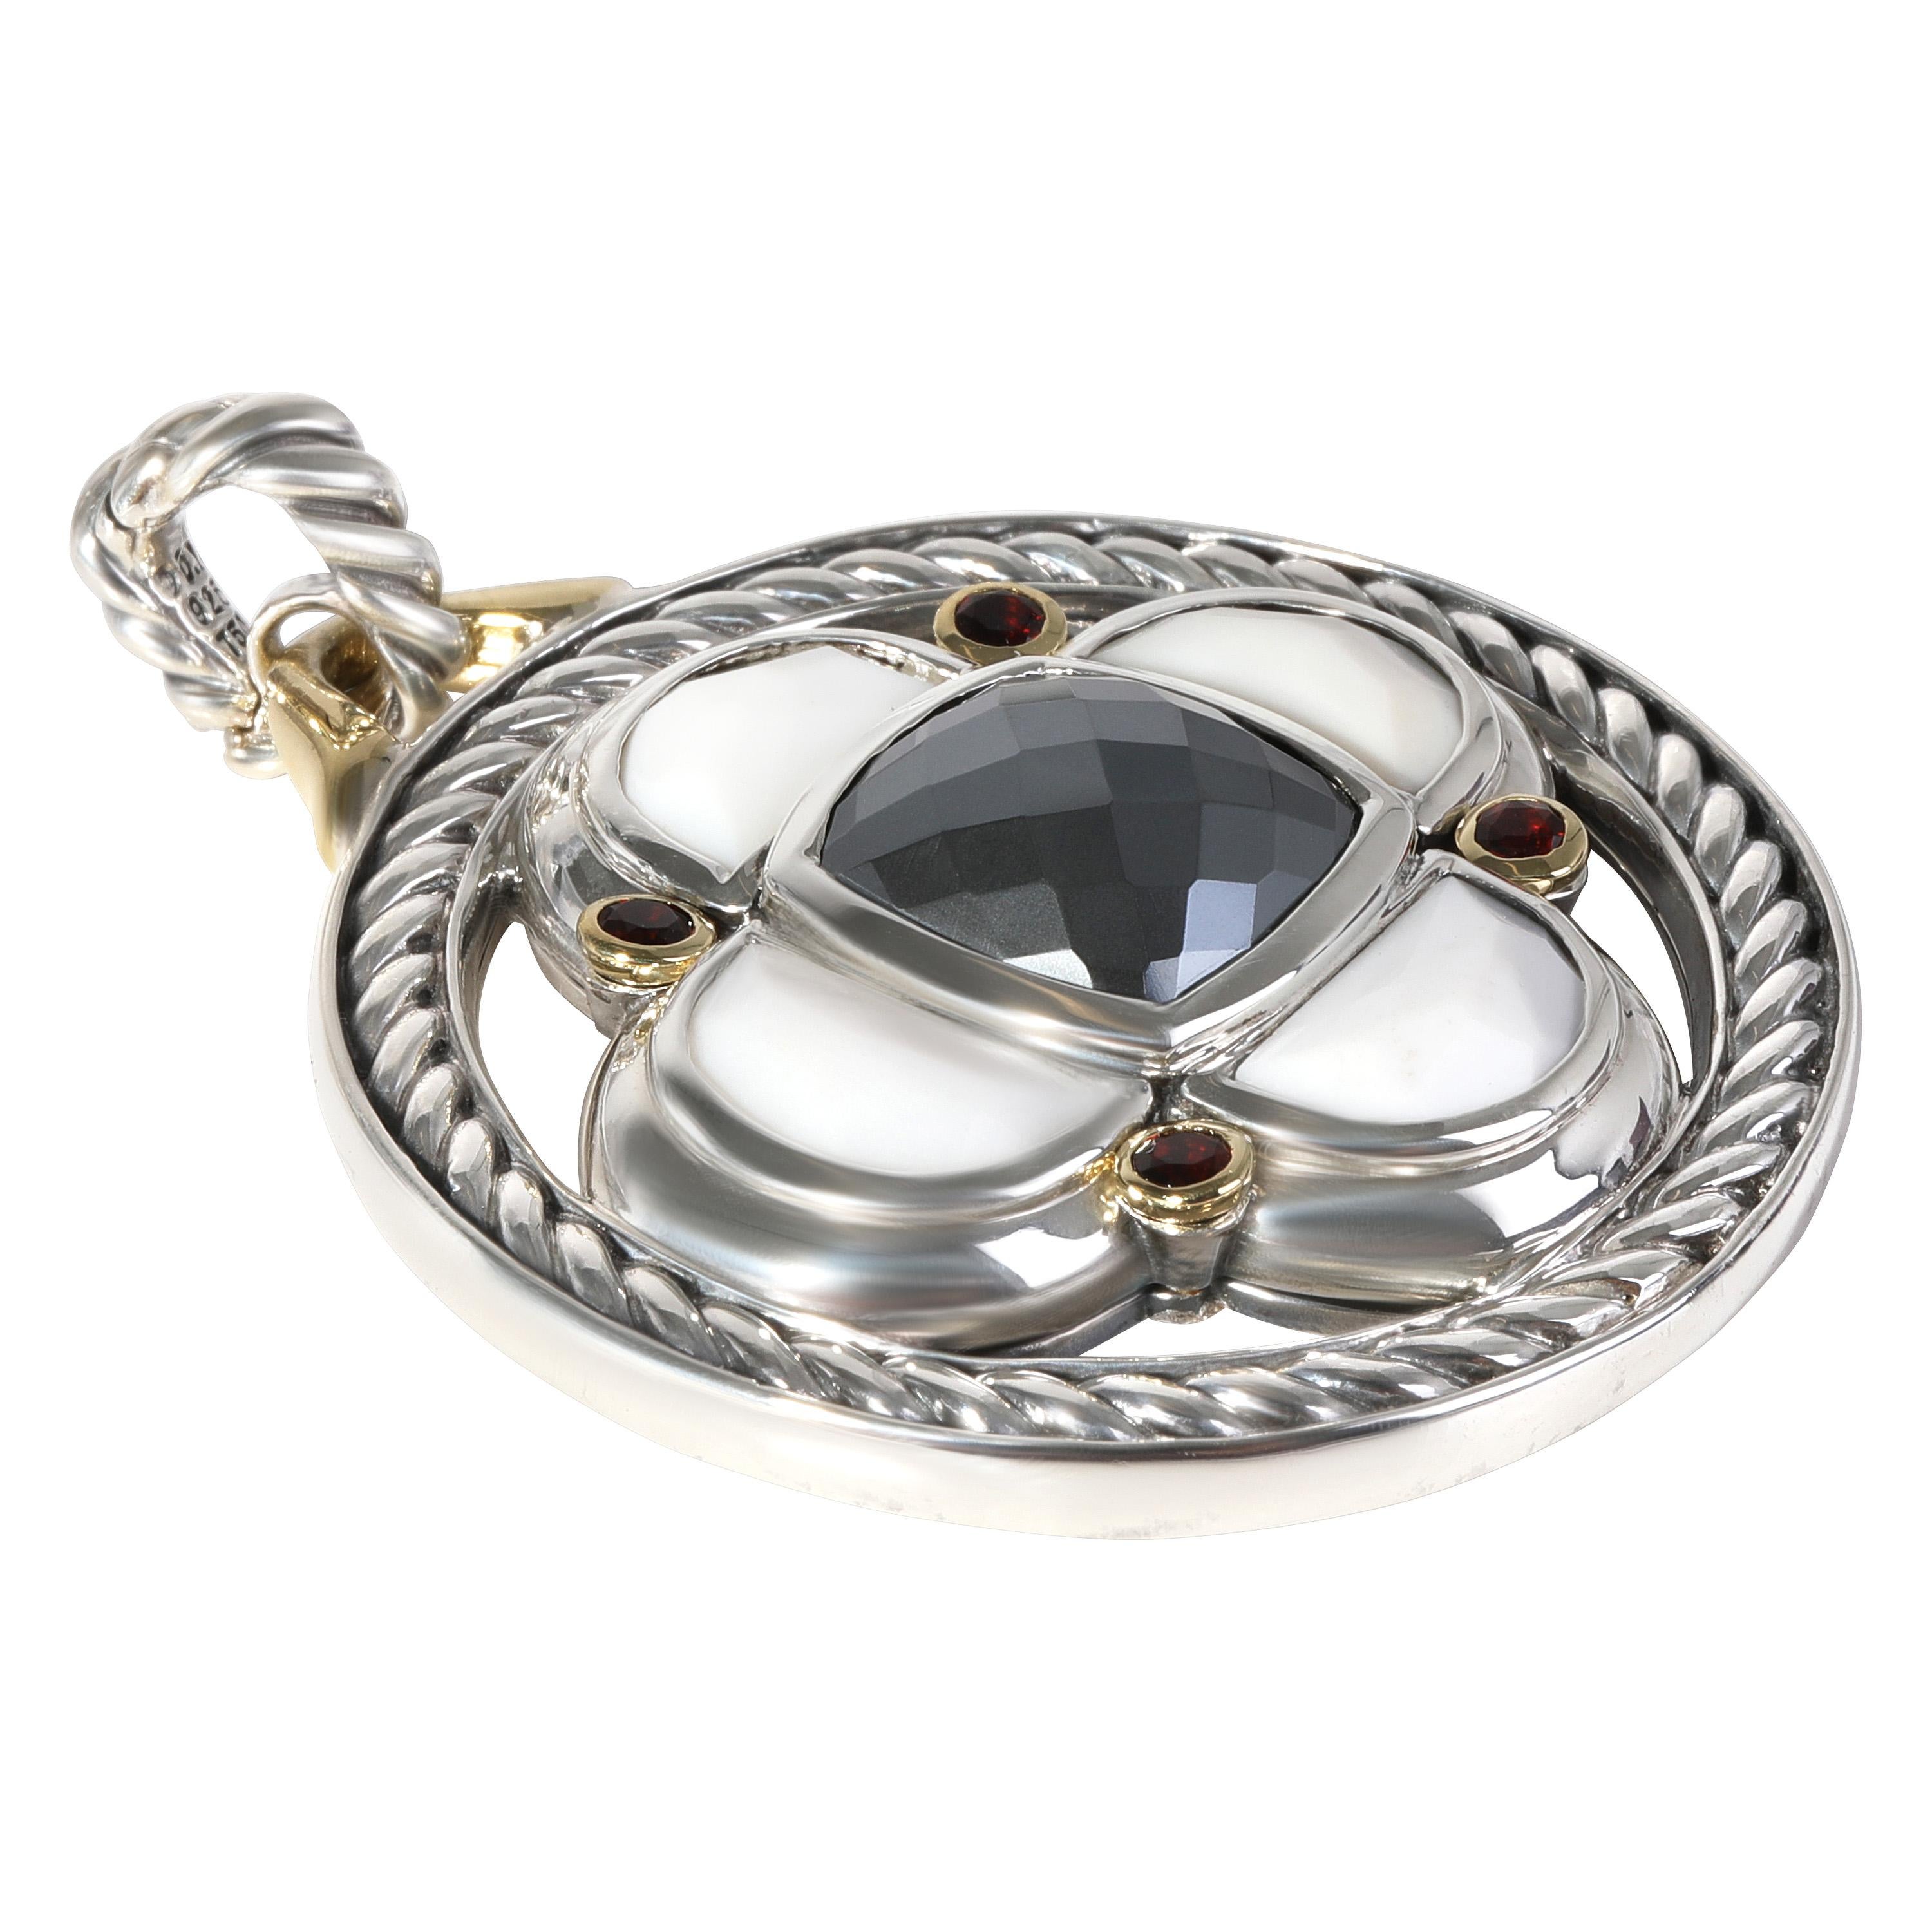 David Yurman Renaissance Pendant in 18K Yellow Gold/Sterling Silver

PRIMARY DETAILS
SKU: 118280
Listing Title: David Yurman Renaissance Pendant in 18K Yellow Gold/Sterling Silver
Condition Description: Retails for 19000 USD. Diameter is 1.5 inches.